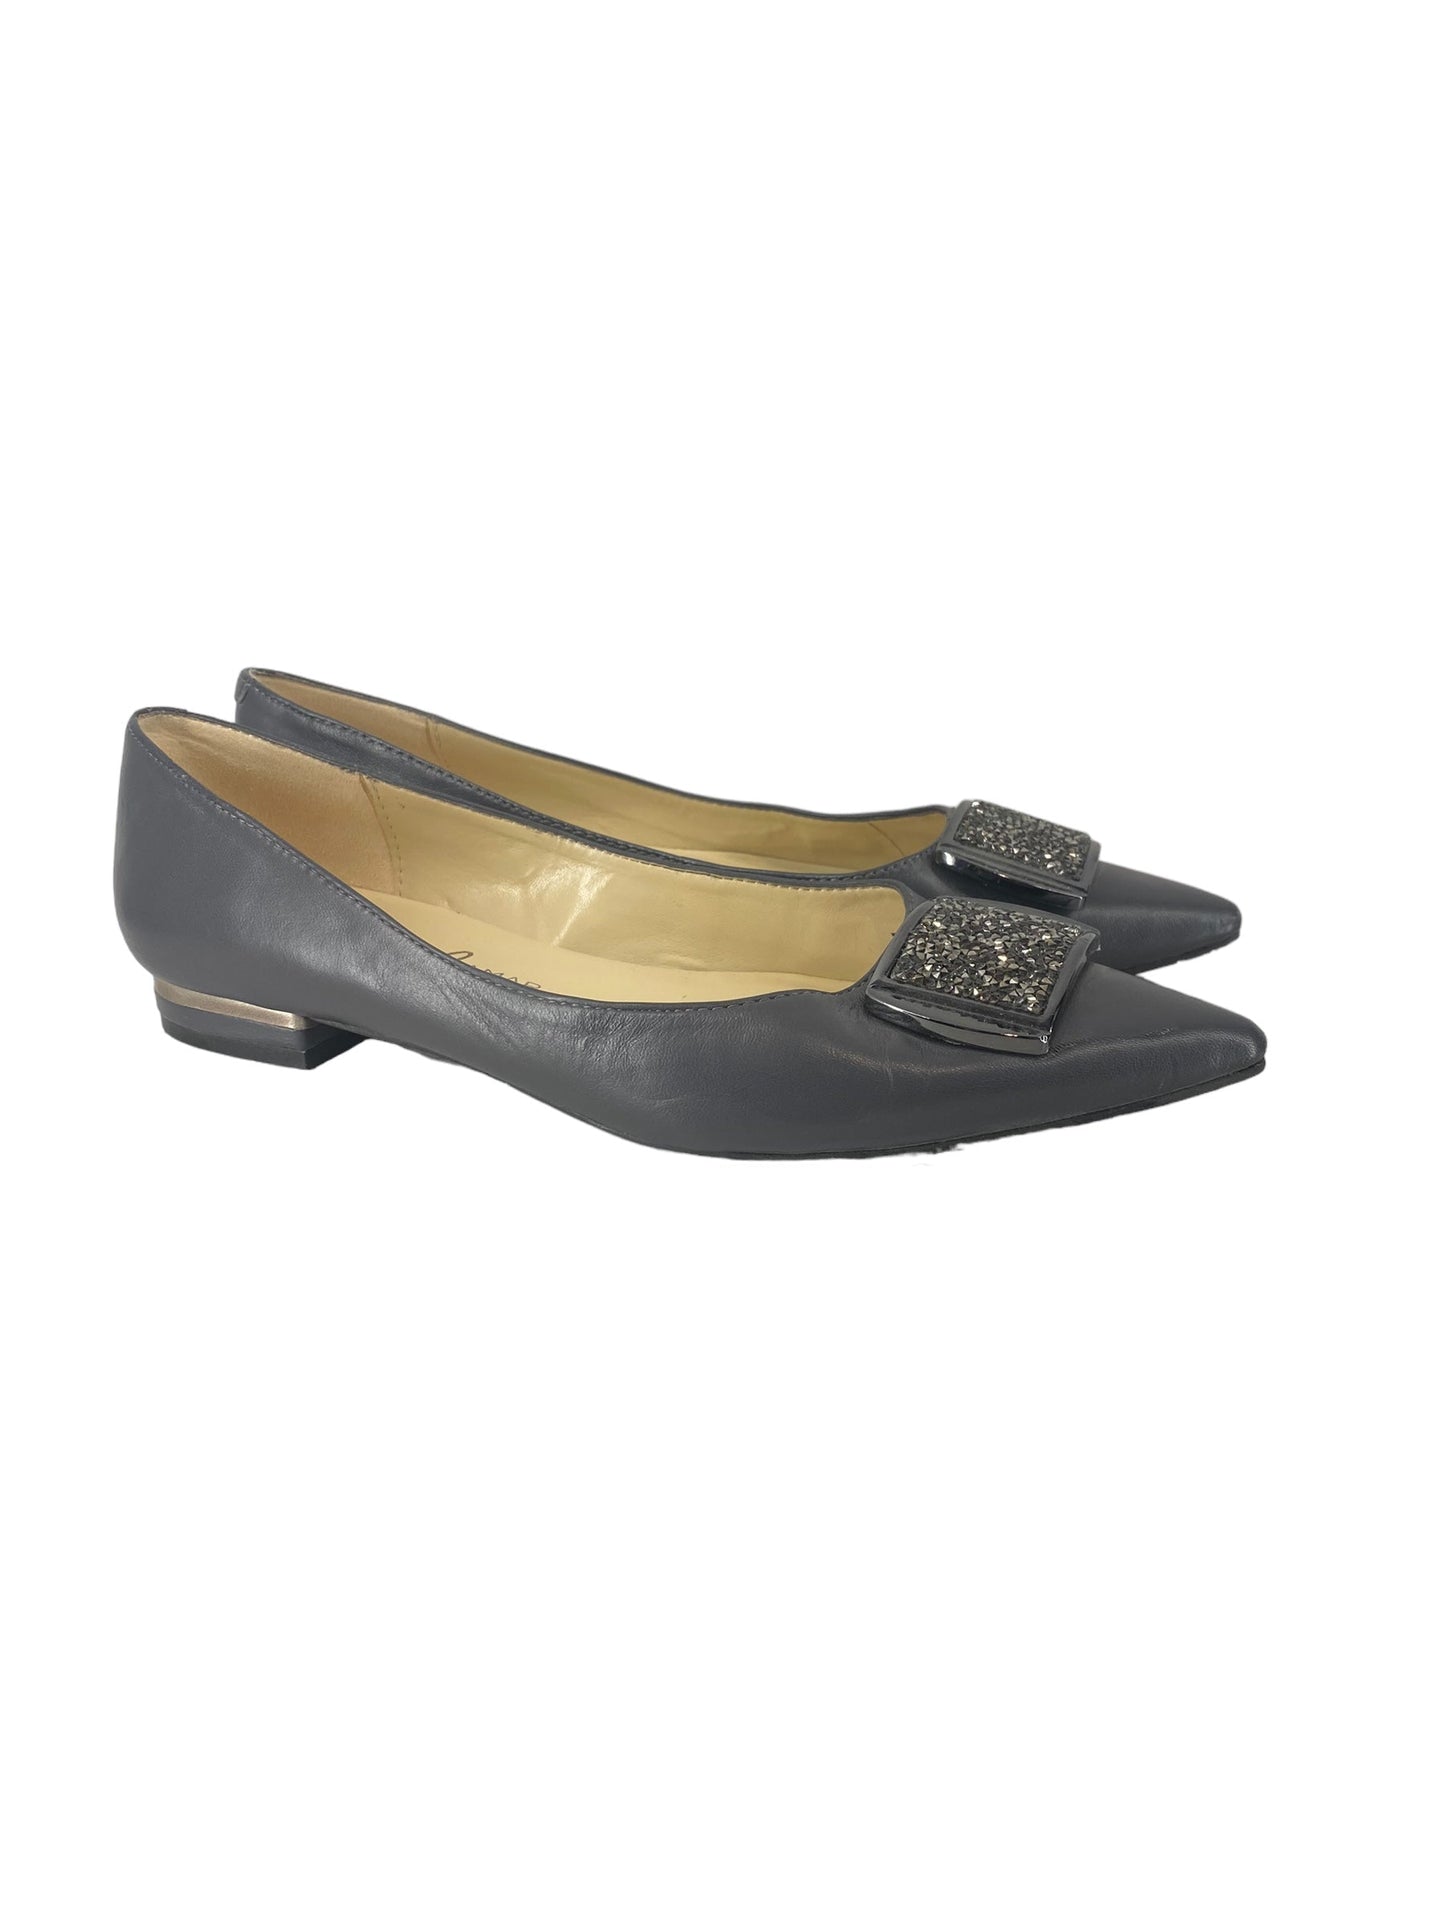 Grey Shoes Flats Clothes Mentor, Size 8